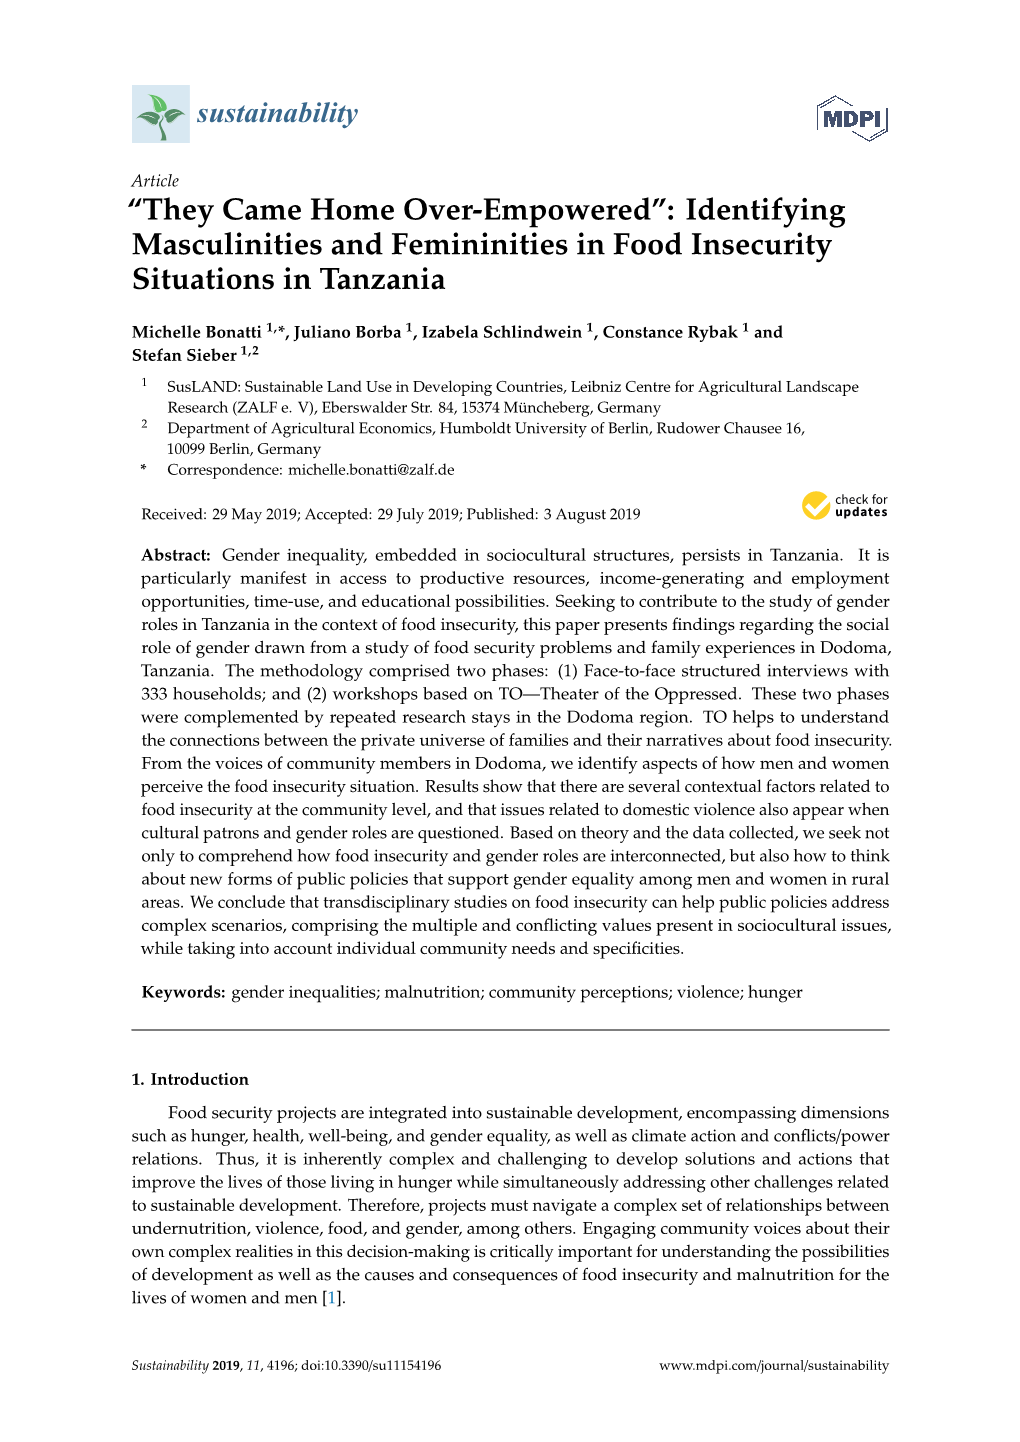 Identifying Masculinities and Femininities in Food Insecurity Situations in Tanzania